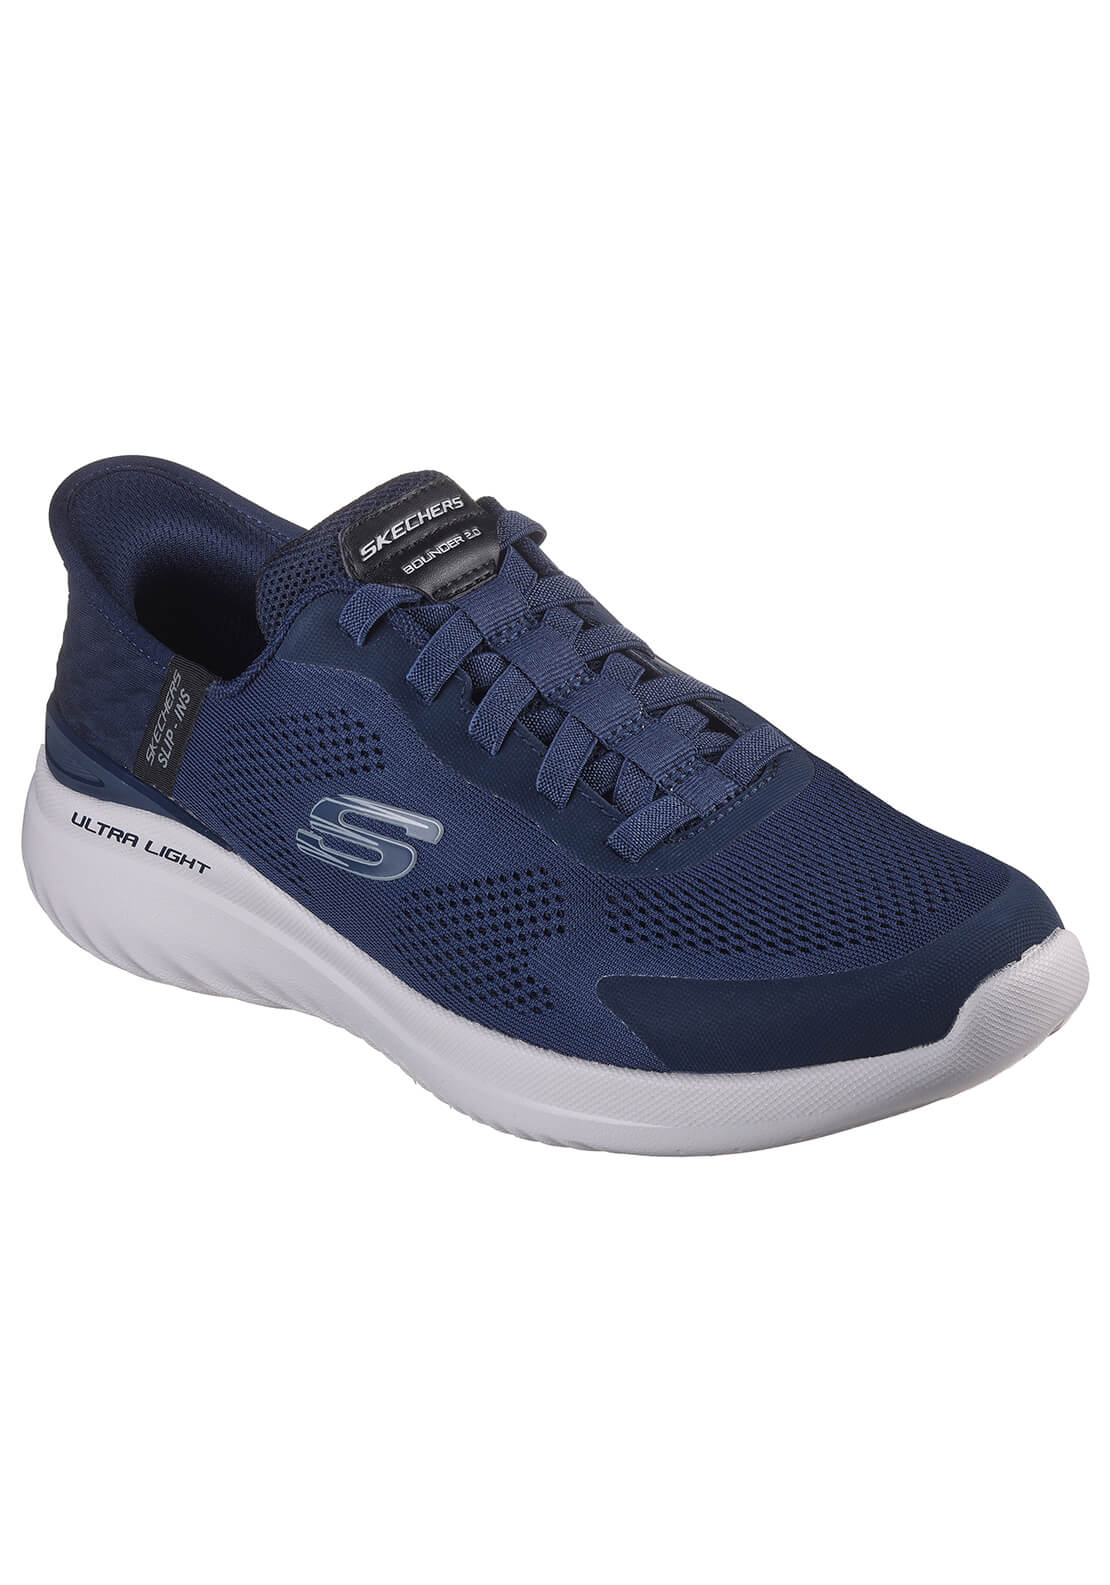 Skechers Bounder 2.0 Emerged - Navy 1 Shaws Department Stores